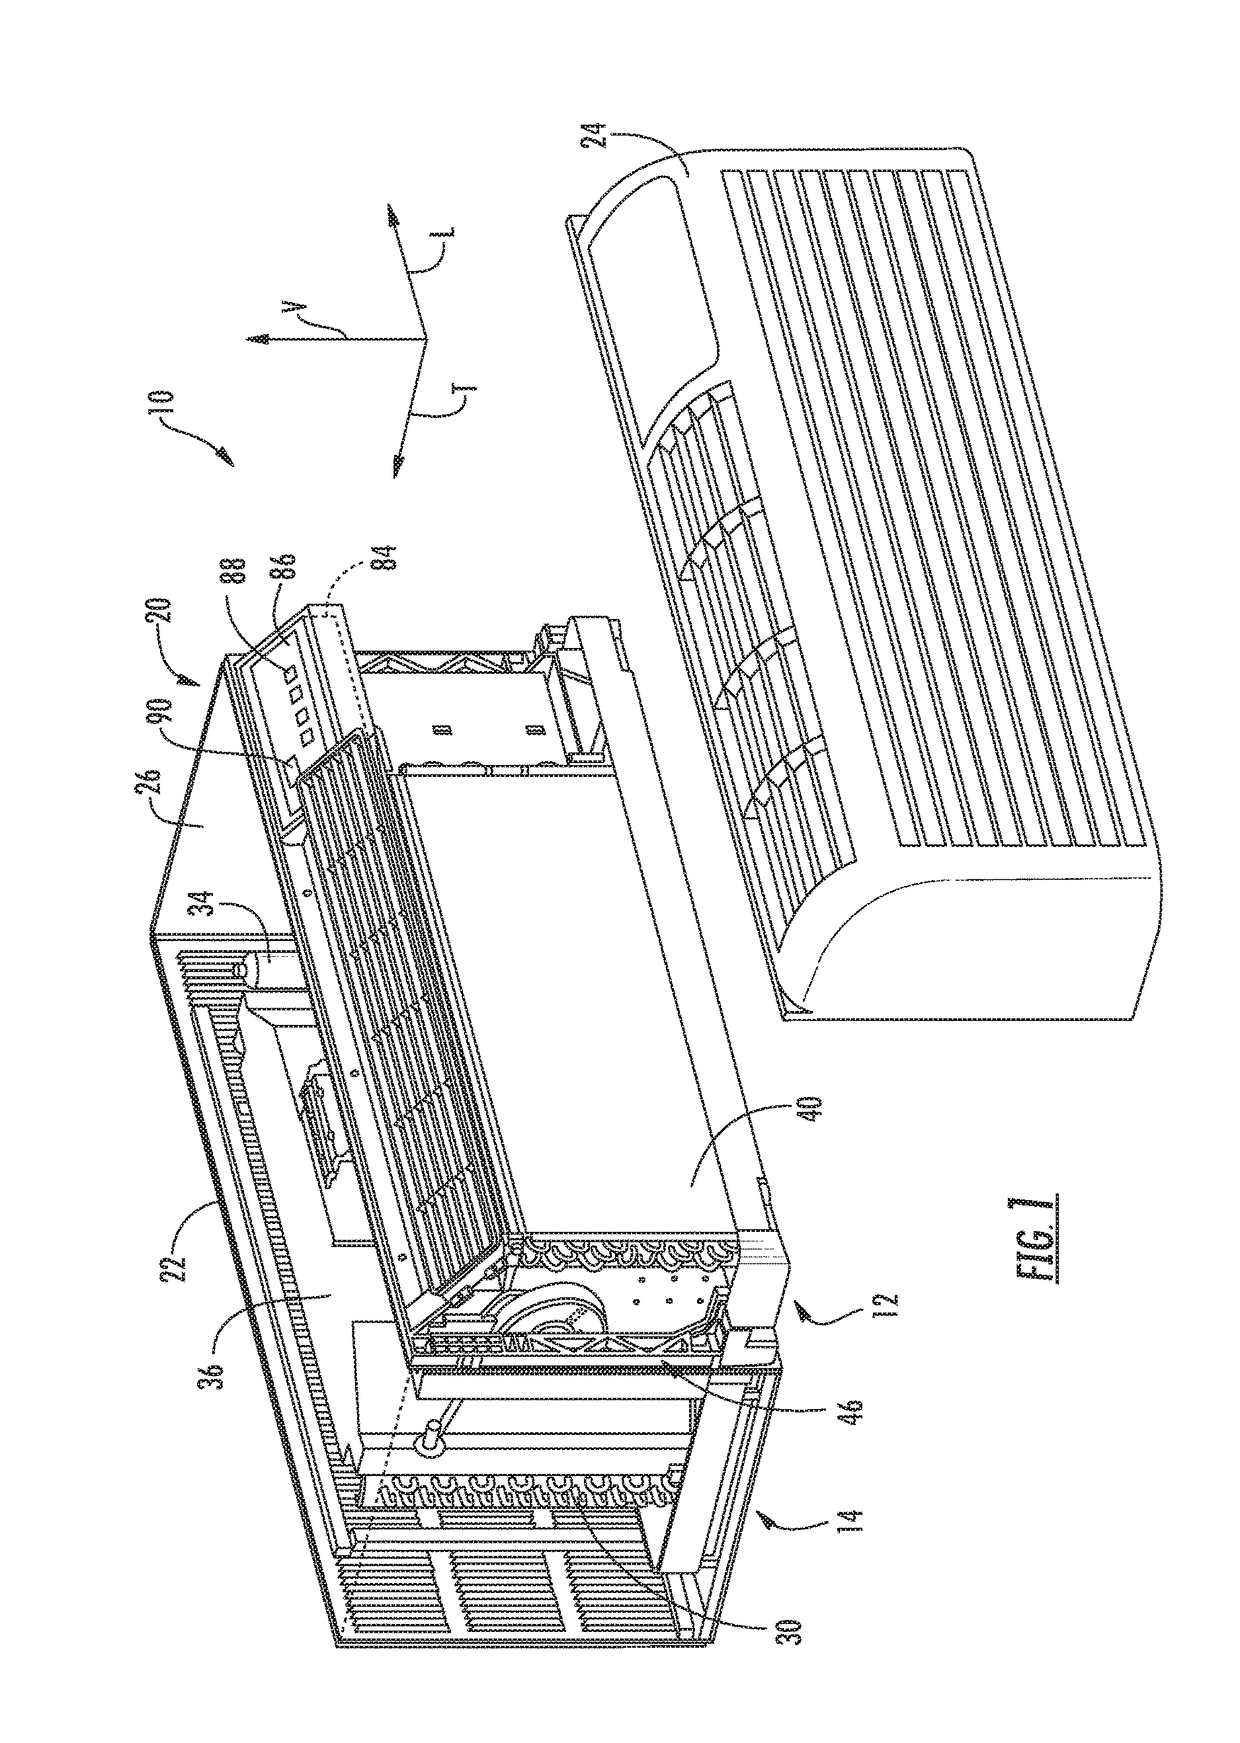 Air Conditioner Units with Improved Make-Up Air System